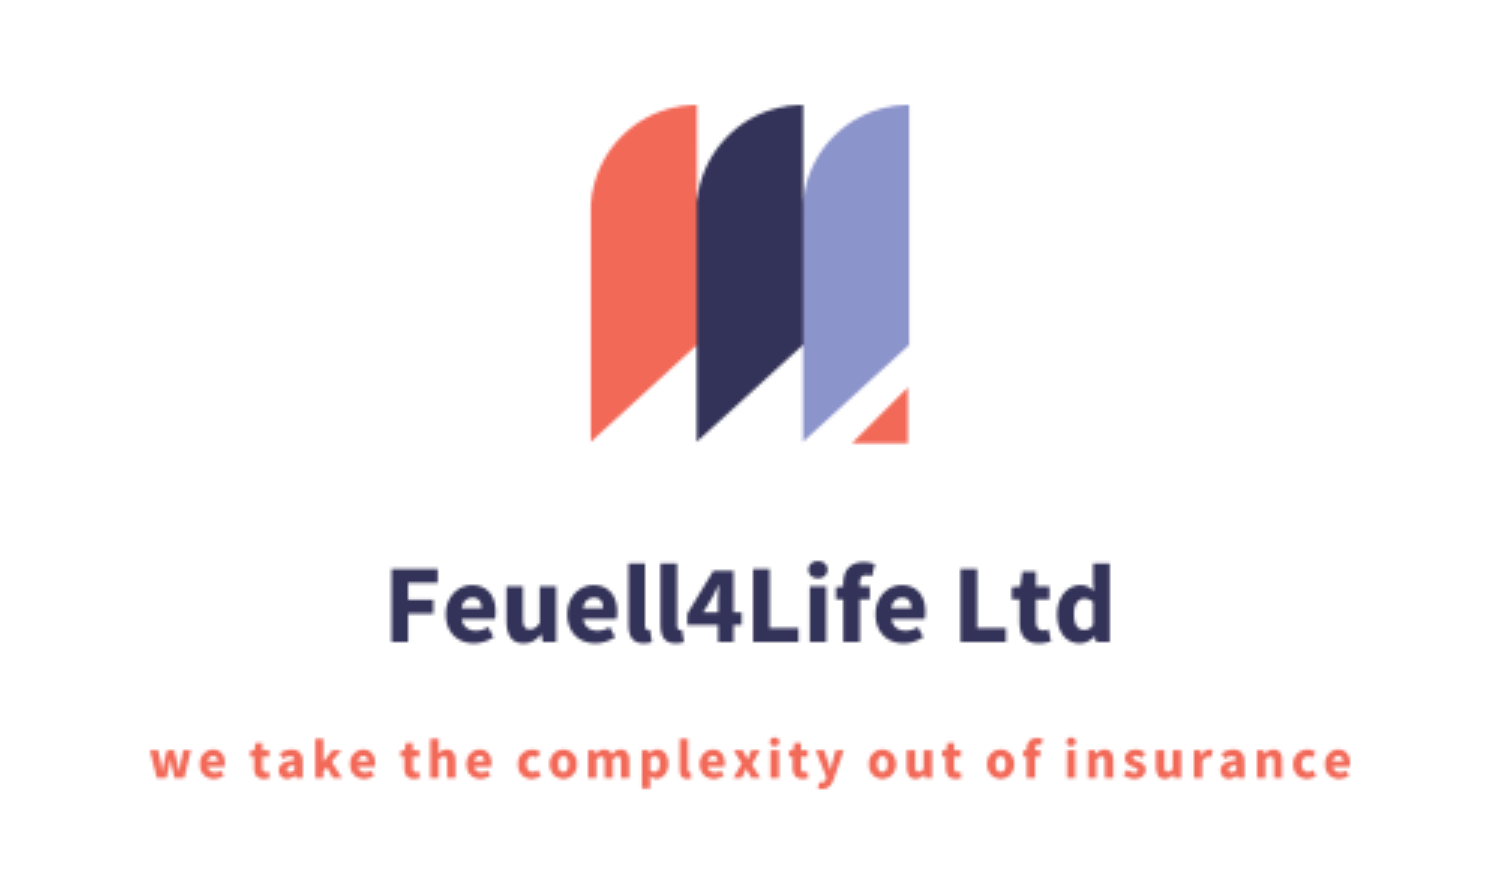 connect-corporate-networking-member-logo-feuell-4-life